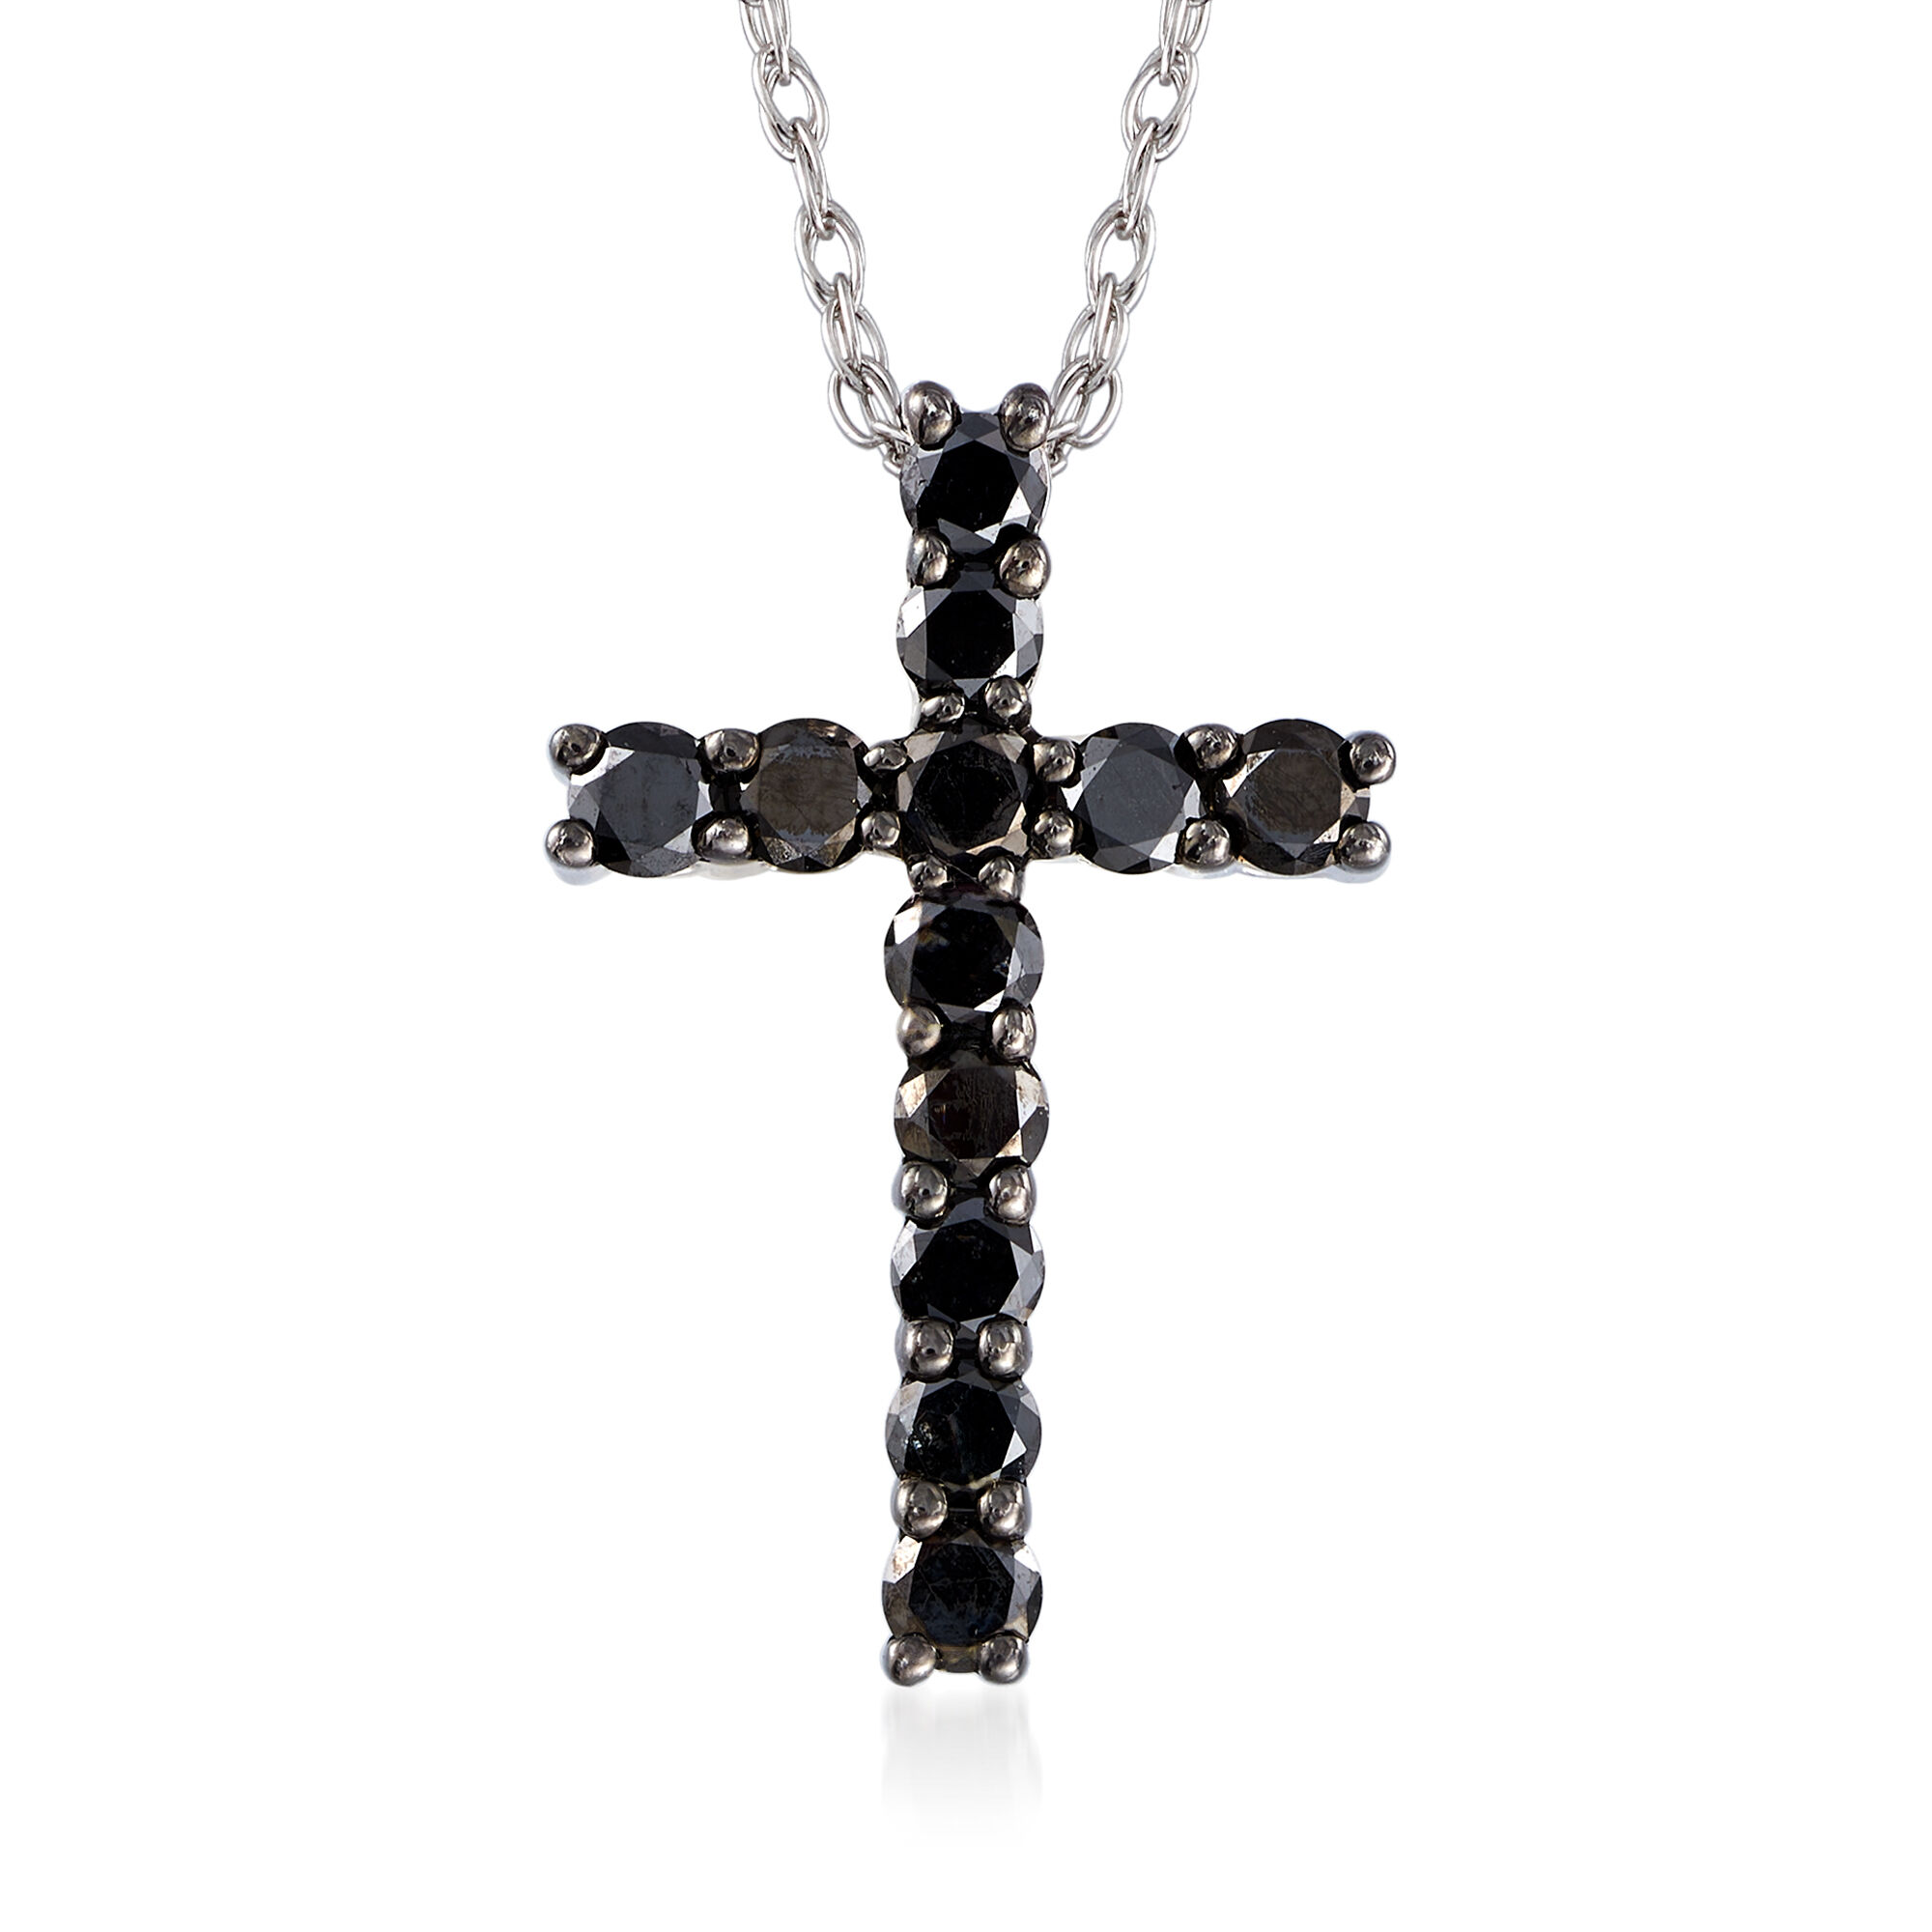 Details about   Genuine Black Diamond 925 Sterling Silver Wing Cross Christmas Gift Pendant O91 